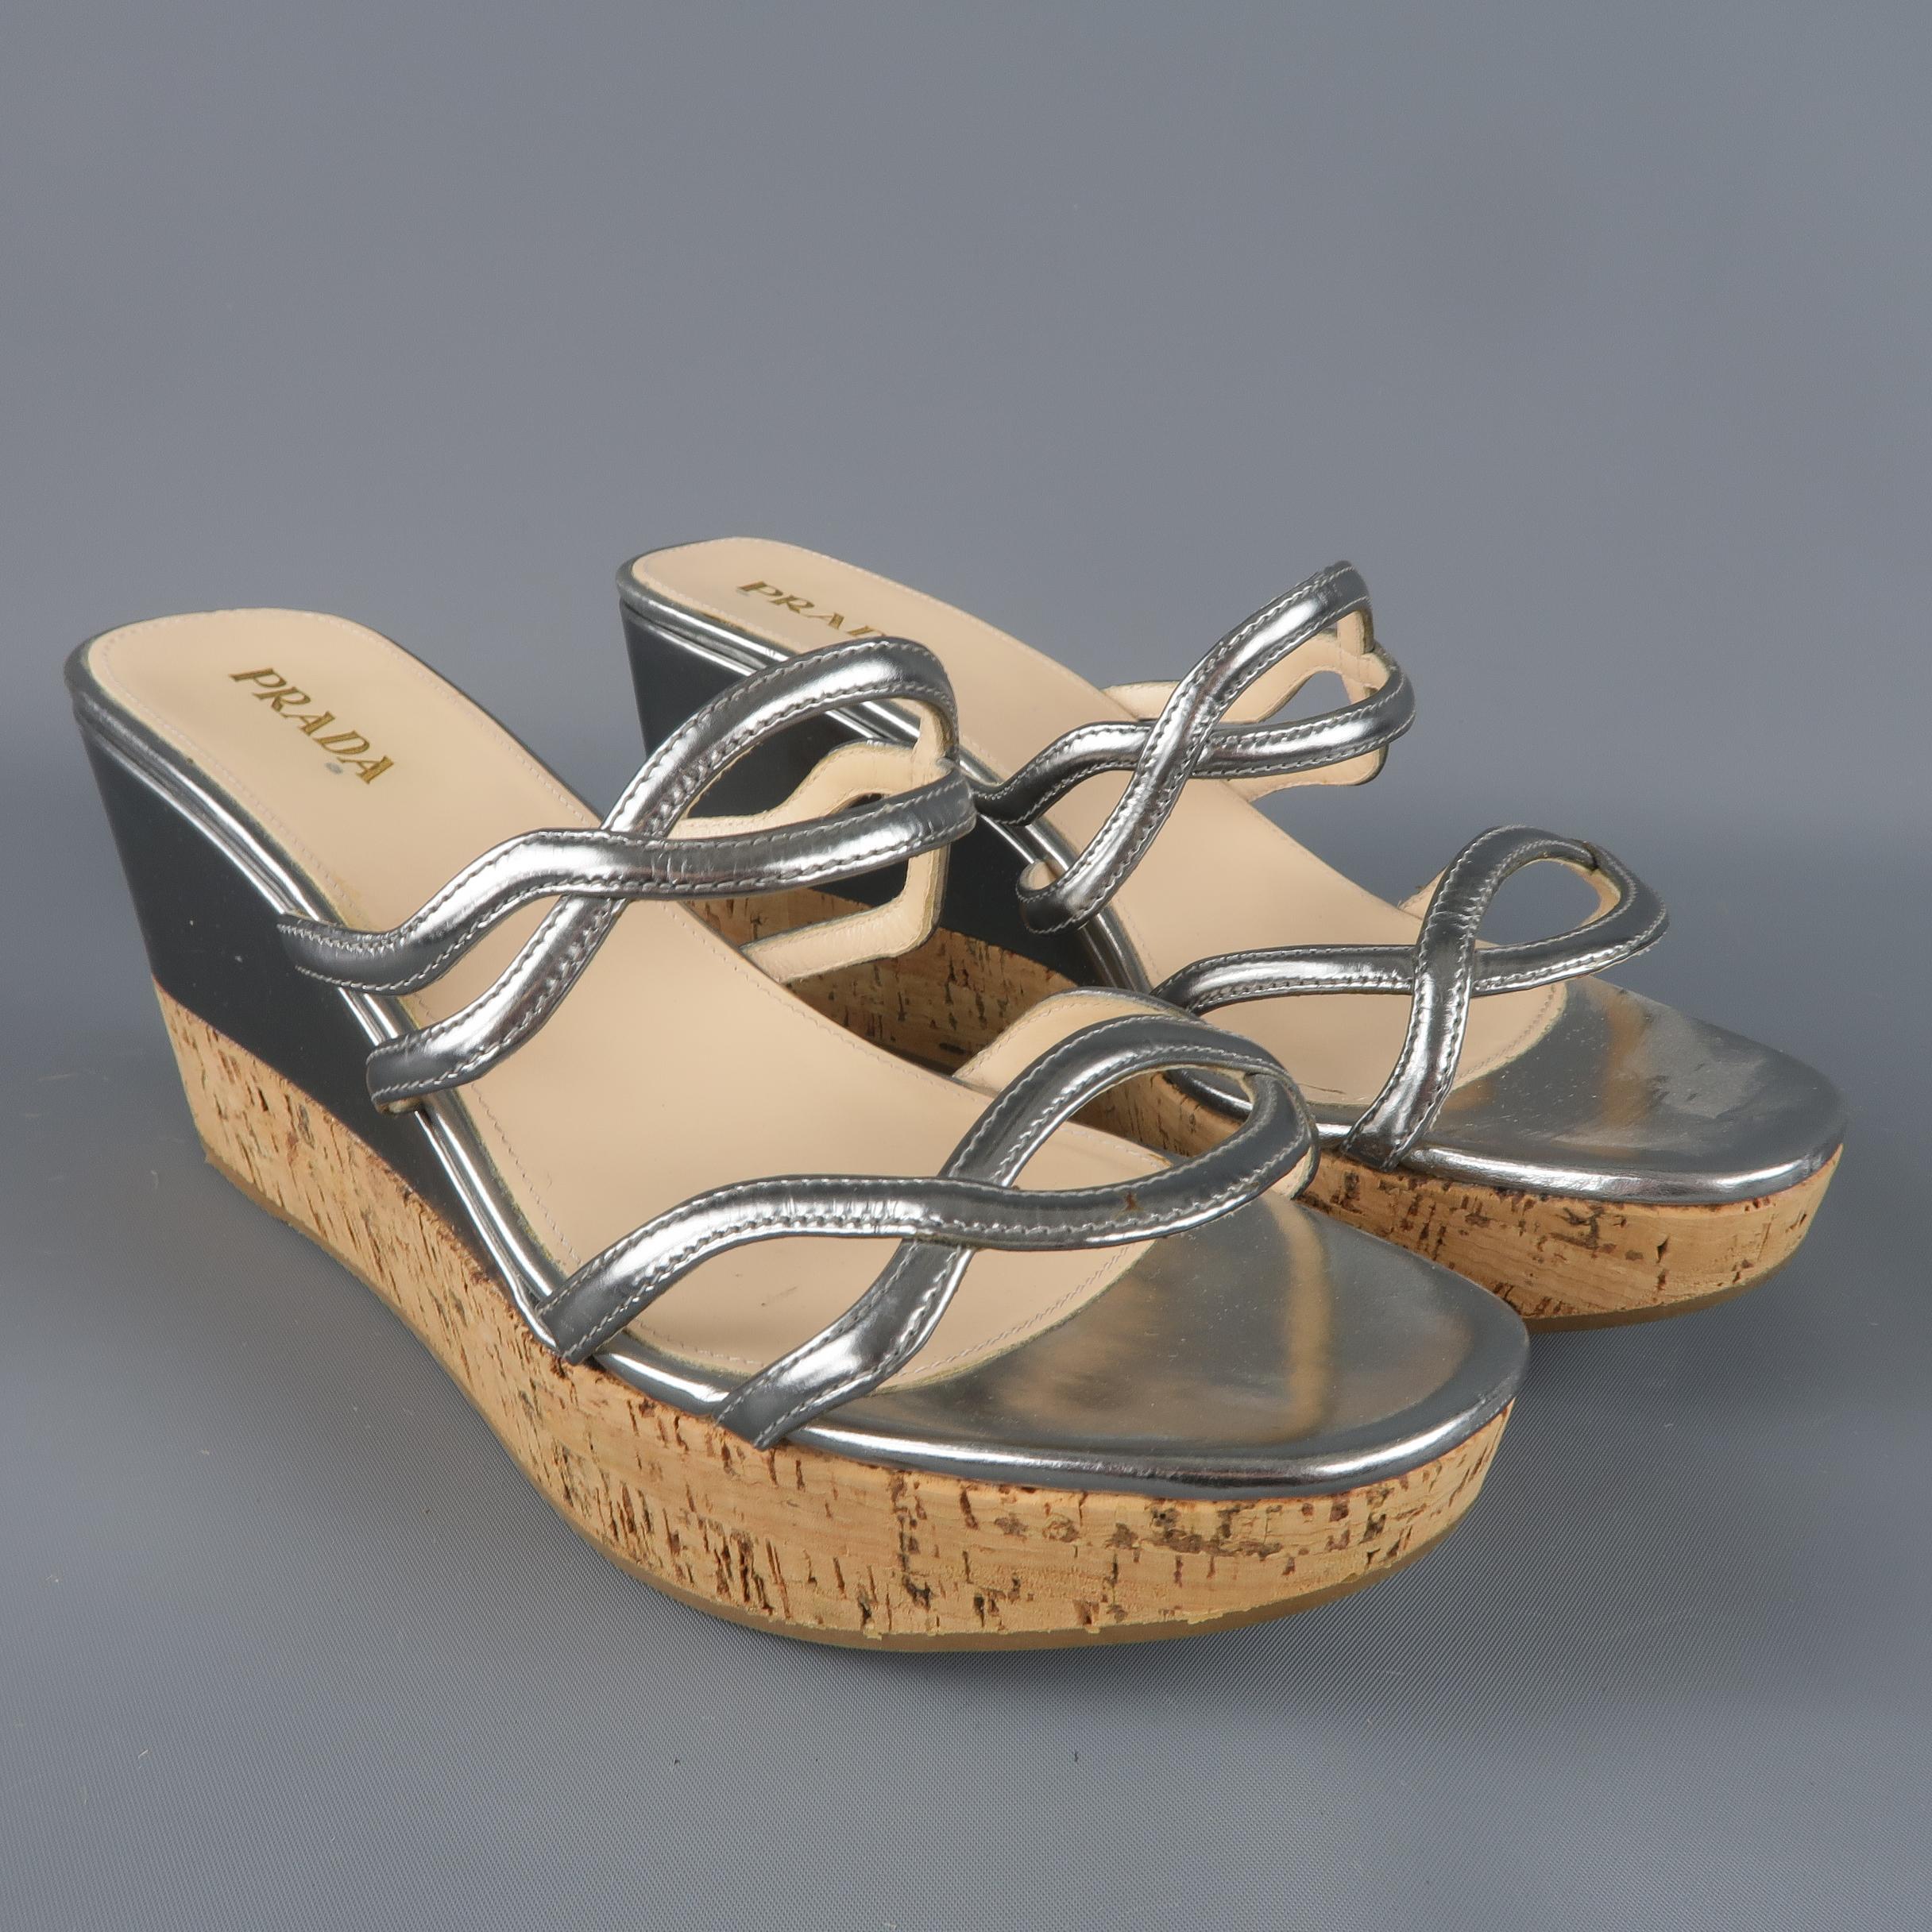 PRADA sandals come in metallic silver leather with double cutout straps and half covered platform cork wedge. Made in Italy.
 
Excellent Pre-Owned Condition.
Marked: IT 40
 
Measurements:
 
Heel: 3.5 in.
Platform: 1.25 in.